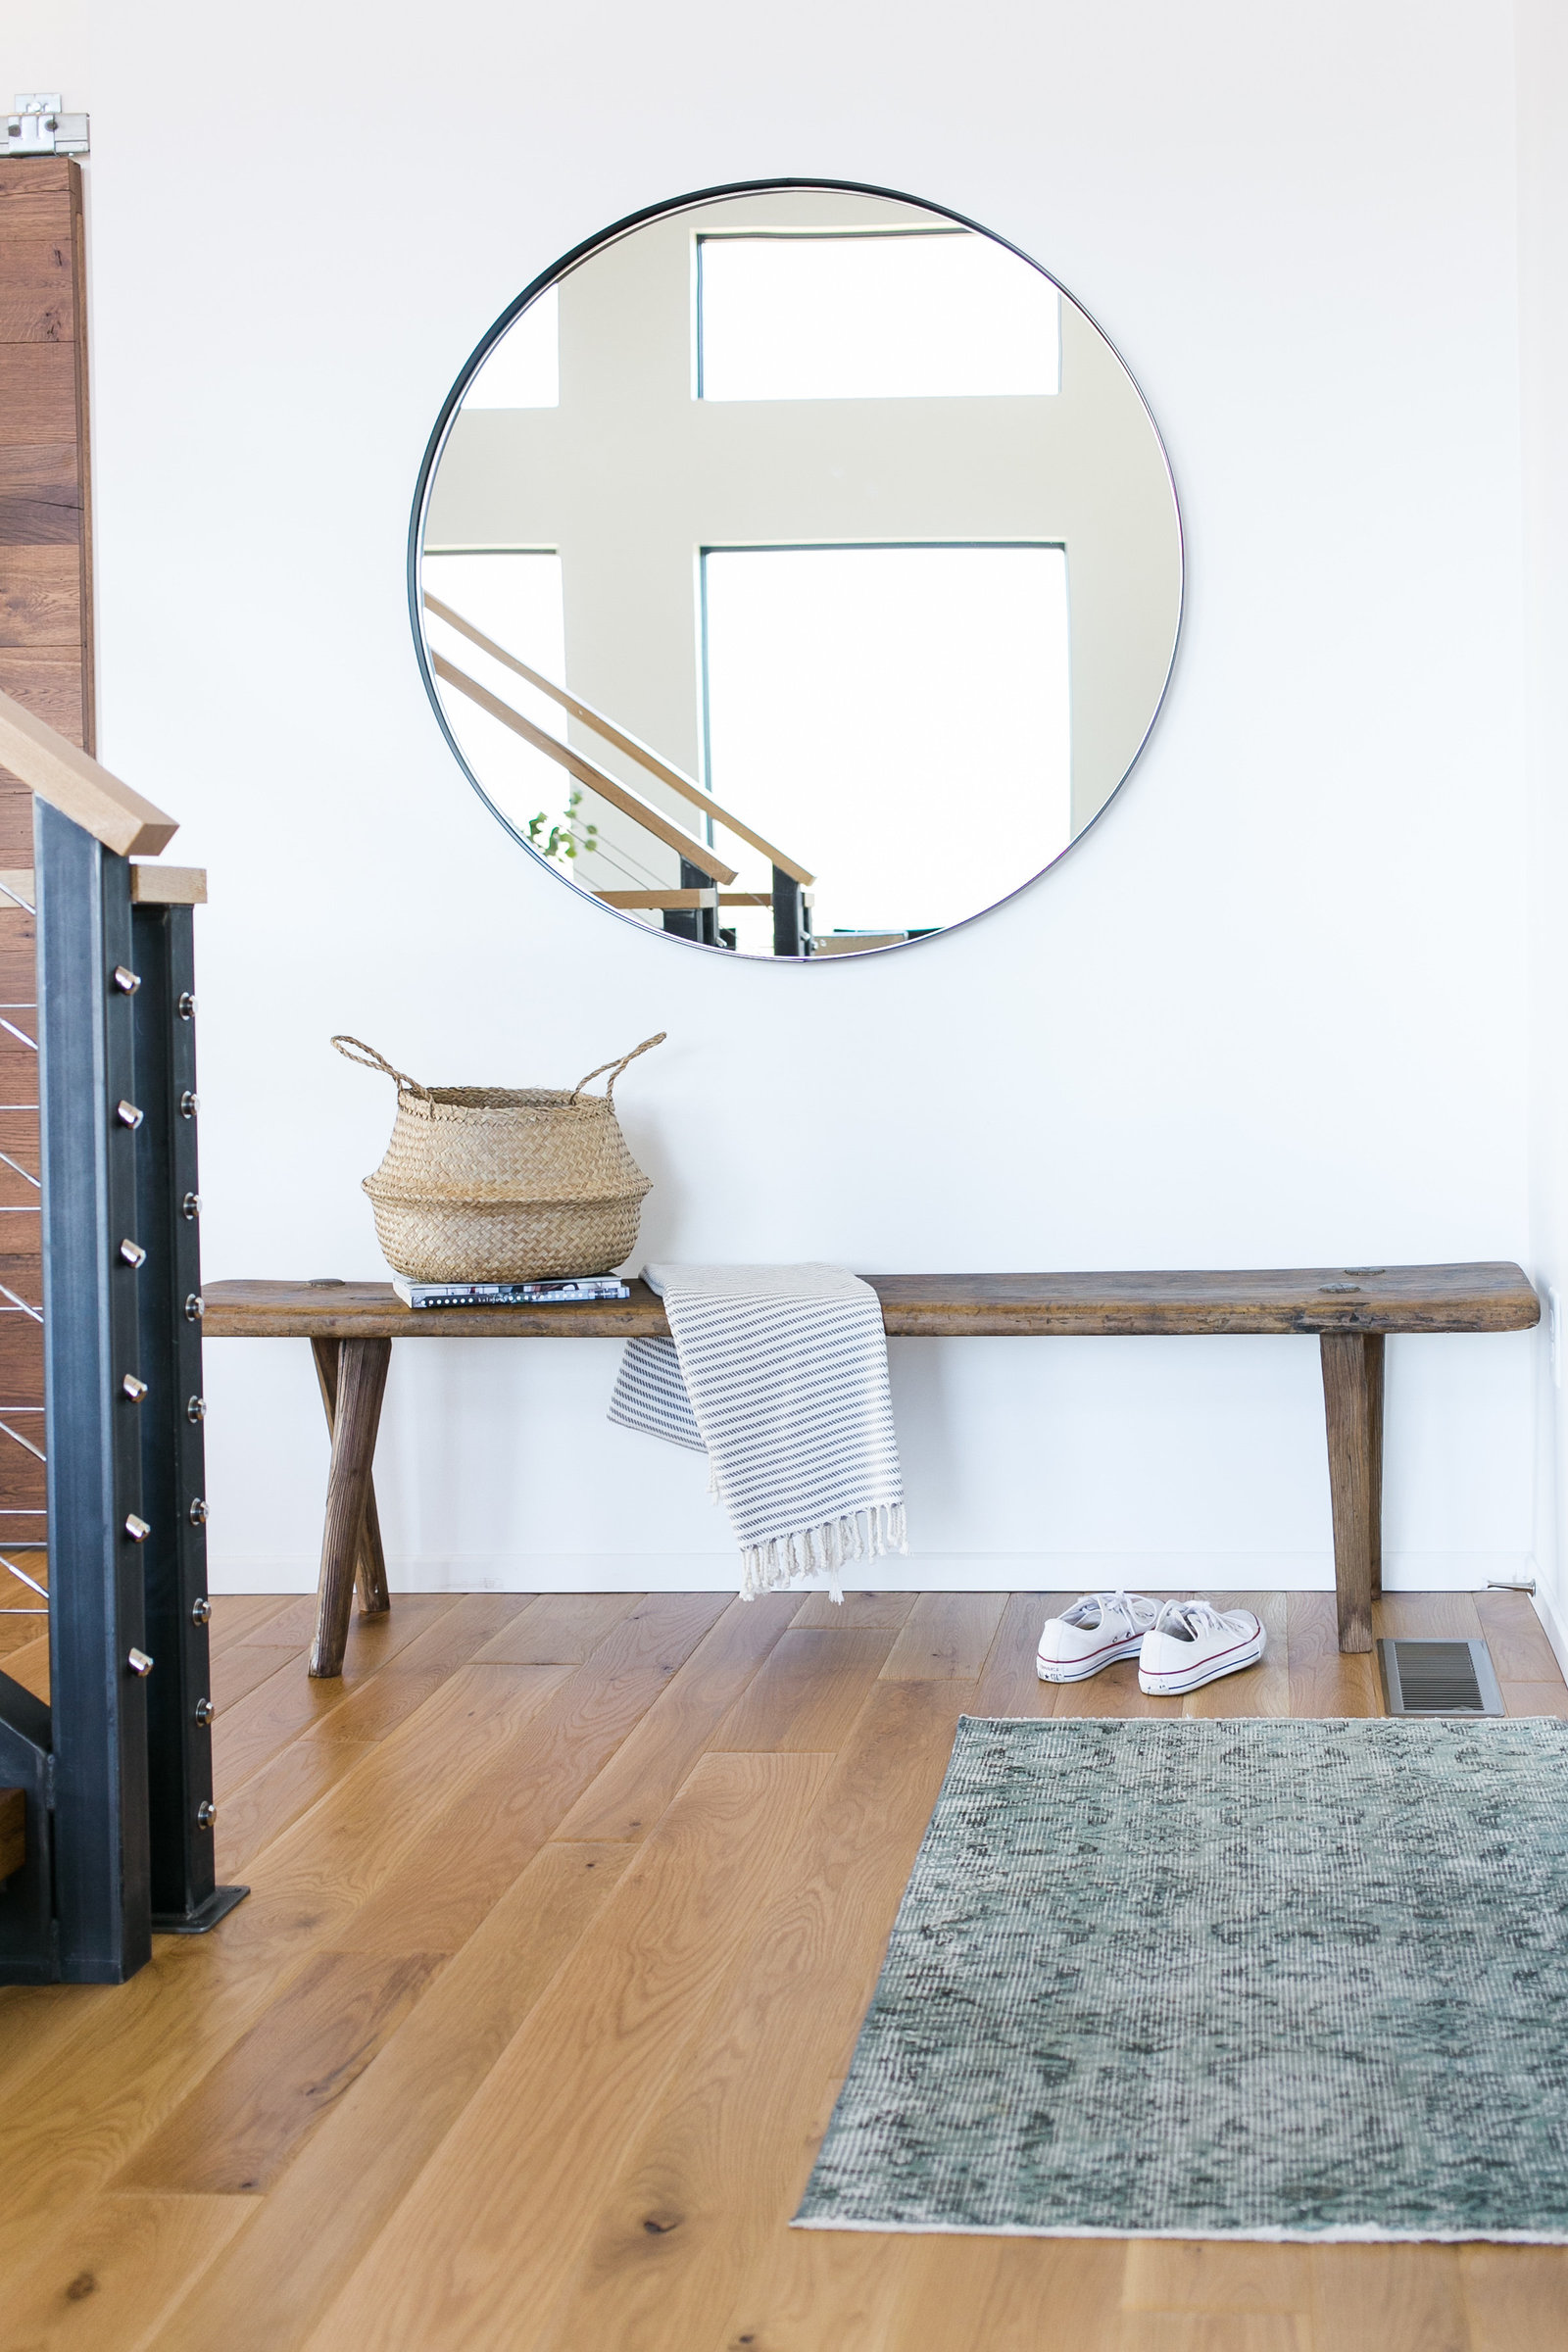 Modern, minimalist entryway with round mirror and reclaimed, antique bench